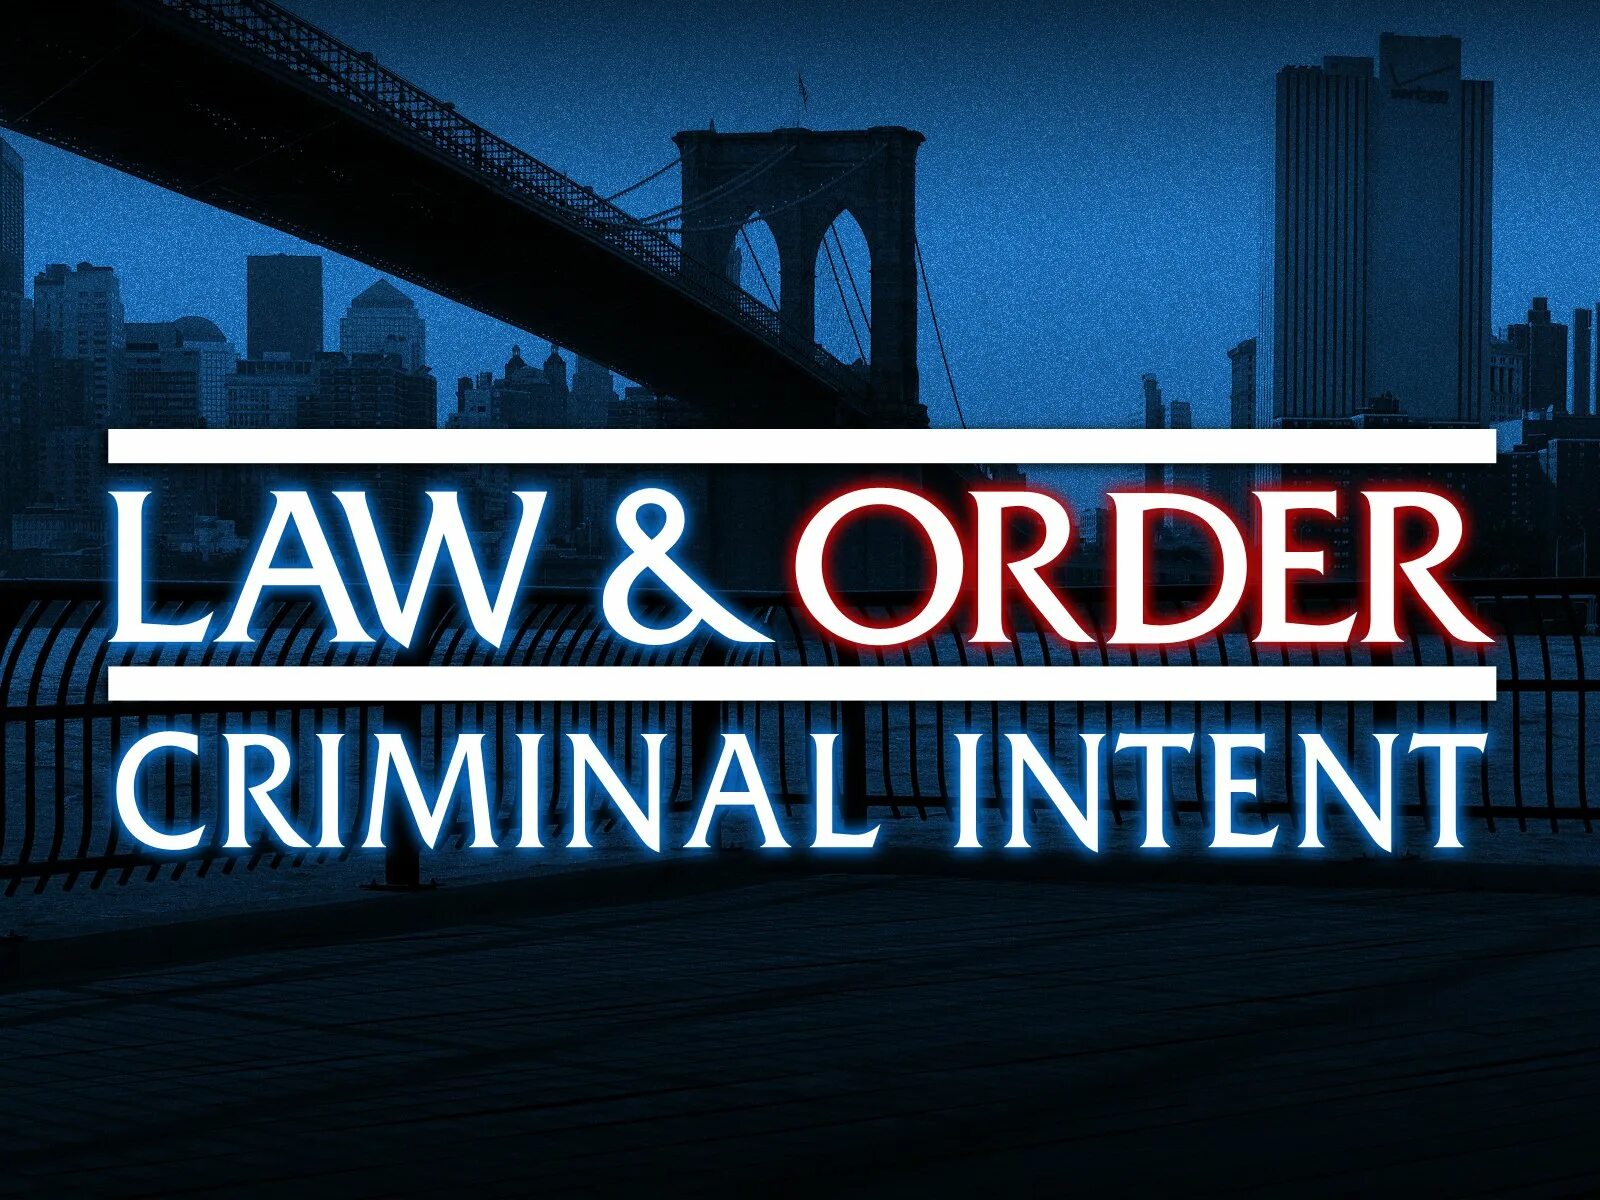 N law ru. Law and order. Law & order: Criminal Intent. Law order Criminal Intent игра. Law and order трафик.